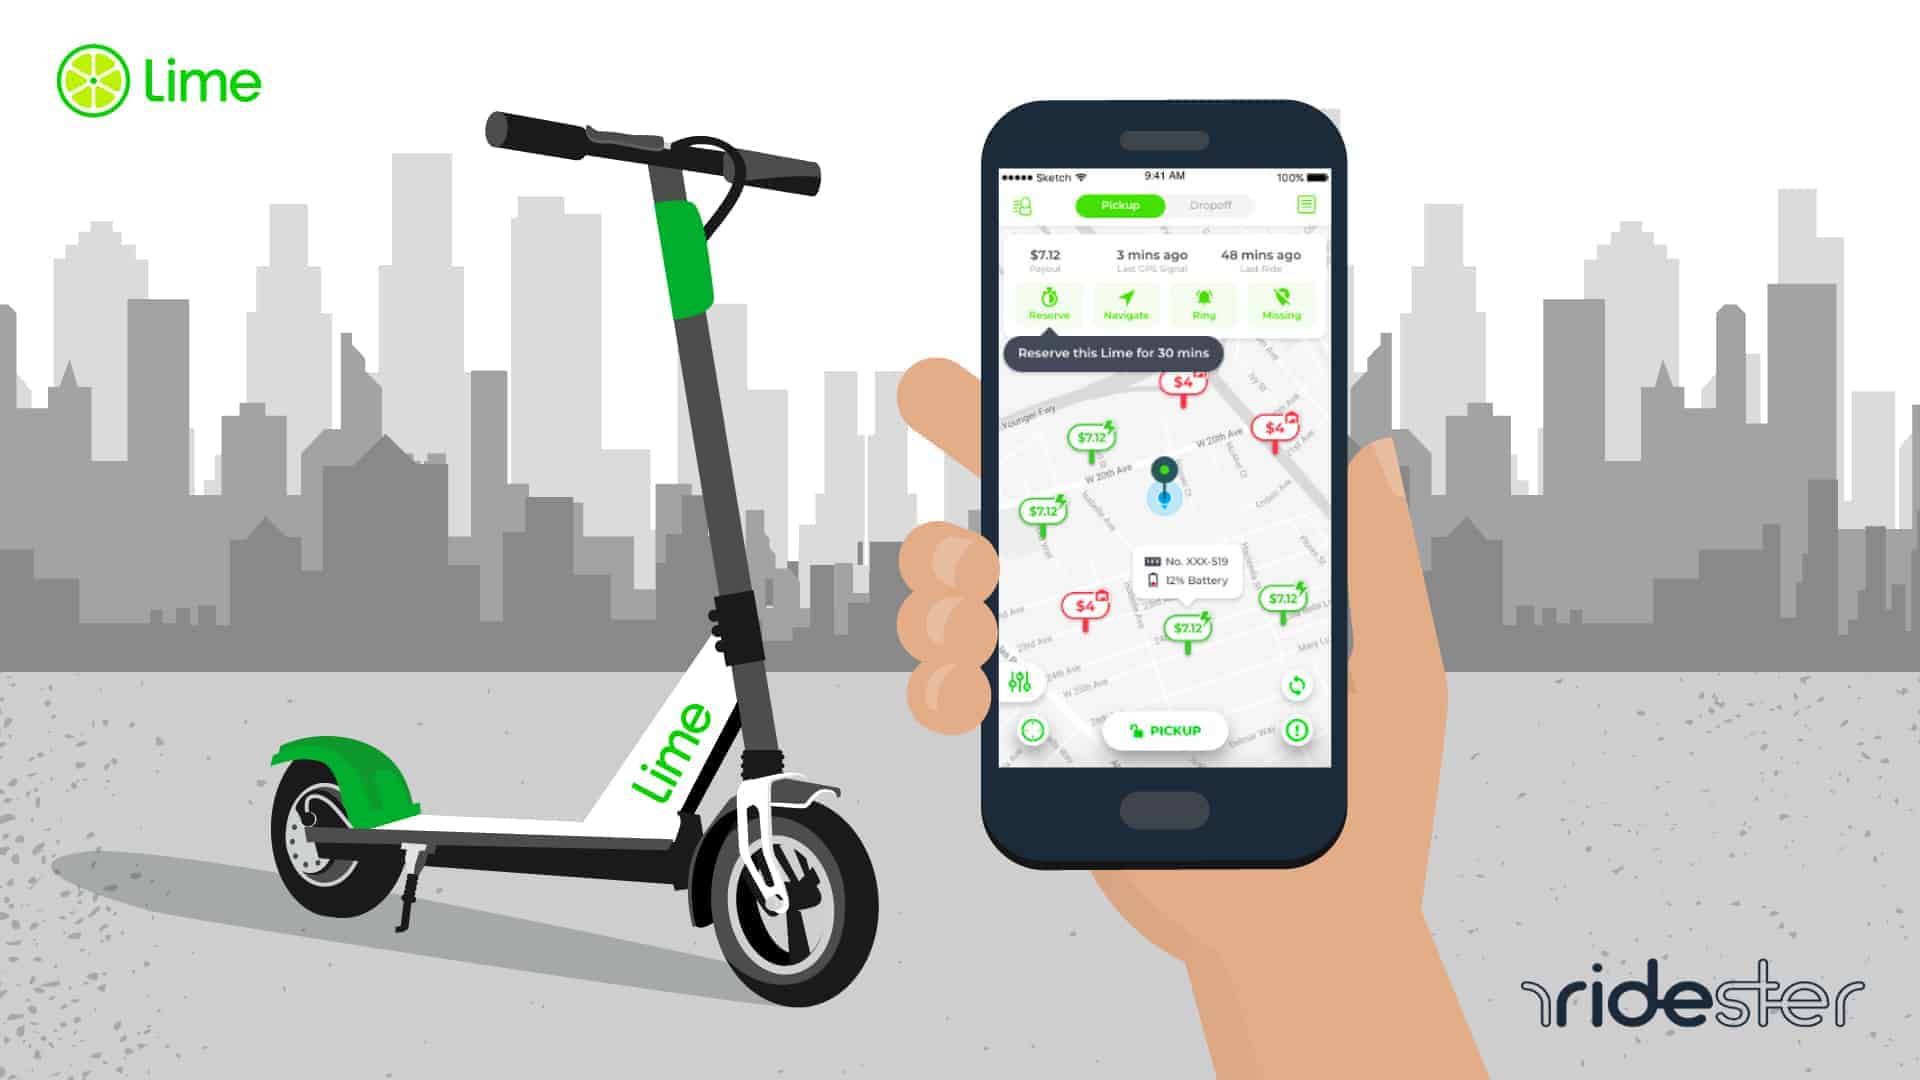 Jeg vasker mit tøj humor handikap Lime Scooter Price: How Much Do Lime Scooters Cost? | Ridester.com